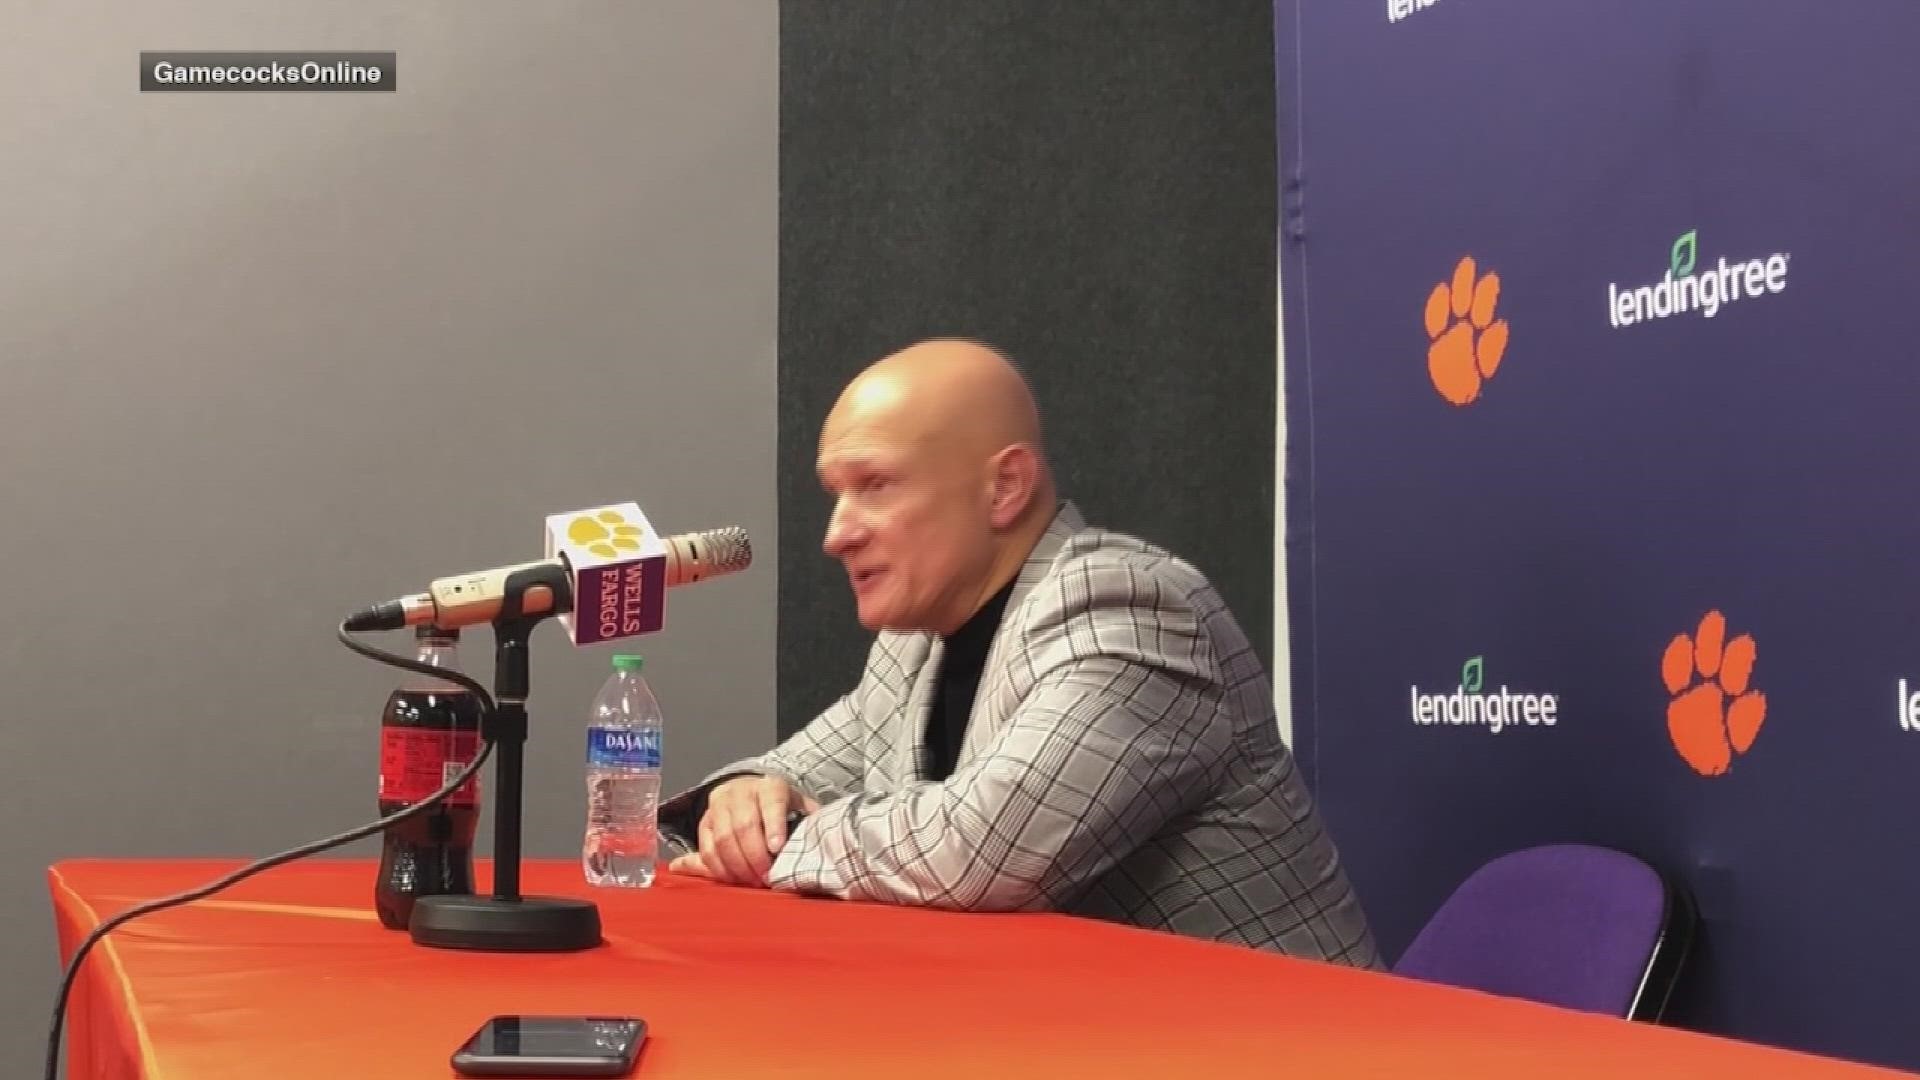 South Carolina head basketball coach Frank Martin and Clemson's Brad Brownell break down Saturday's game between the Gamecocks and the Tigers.